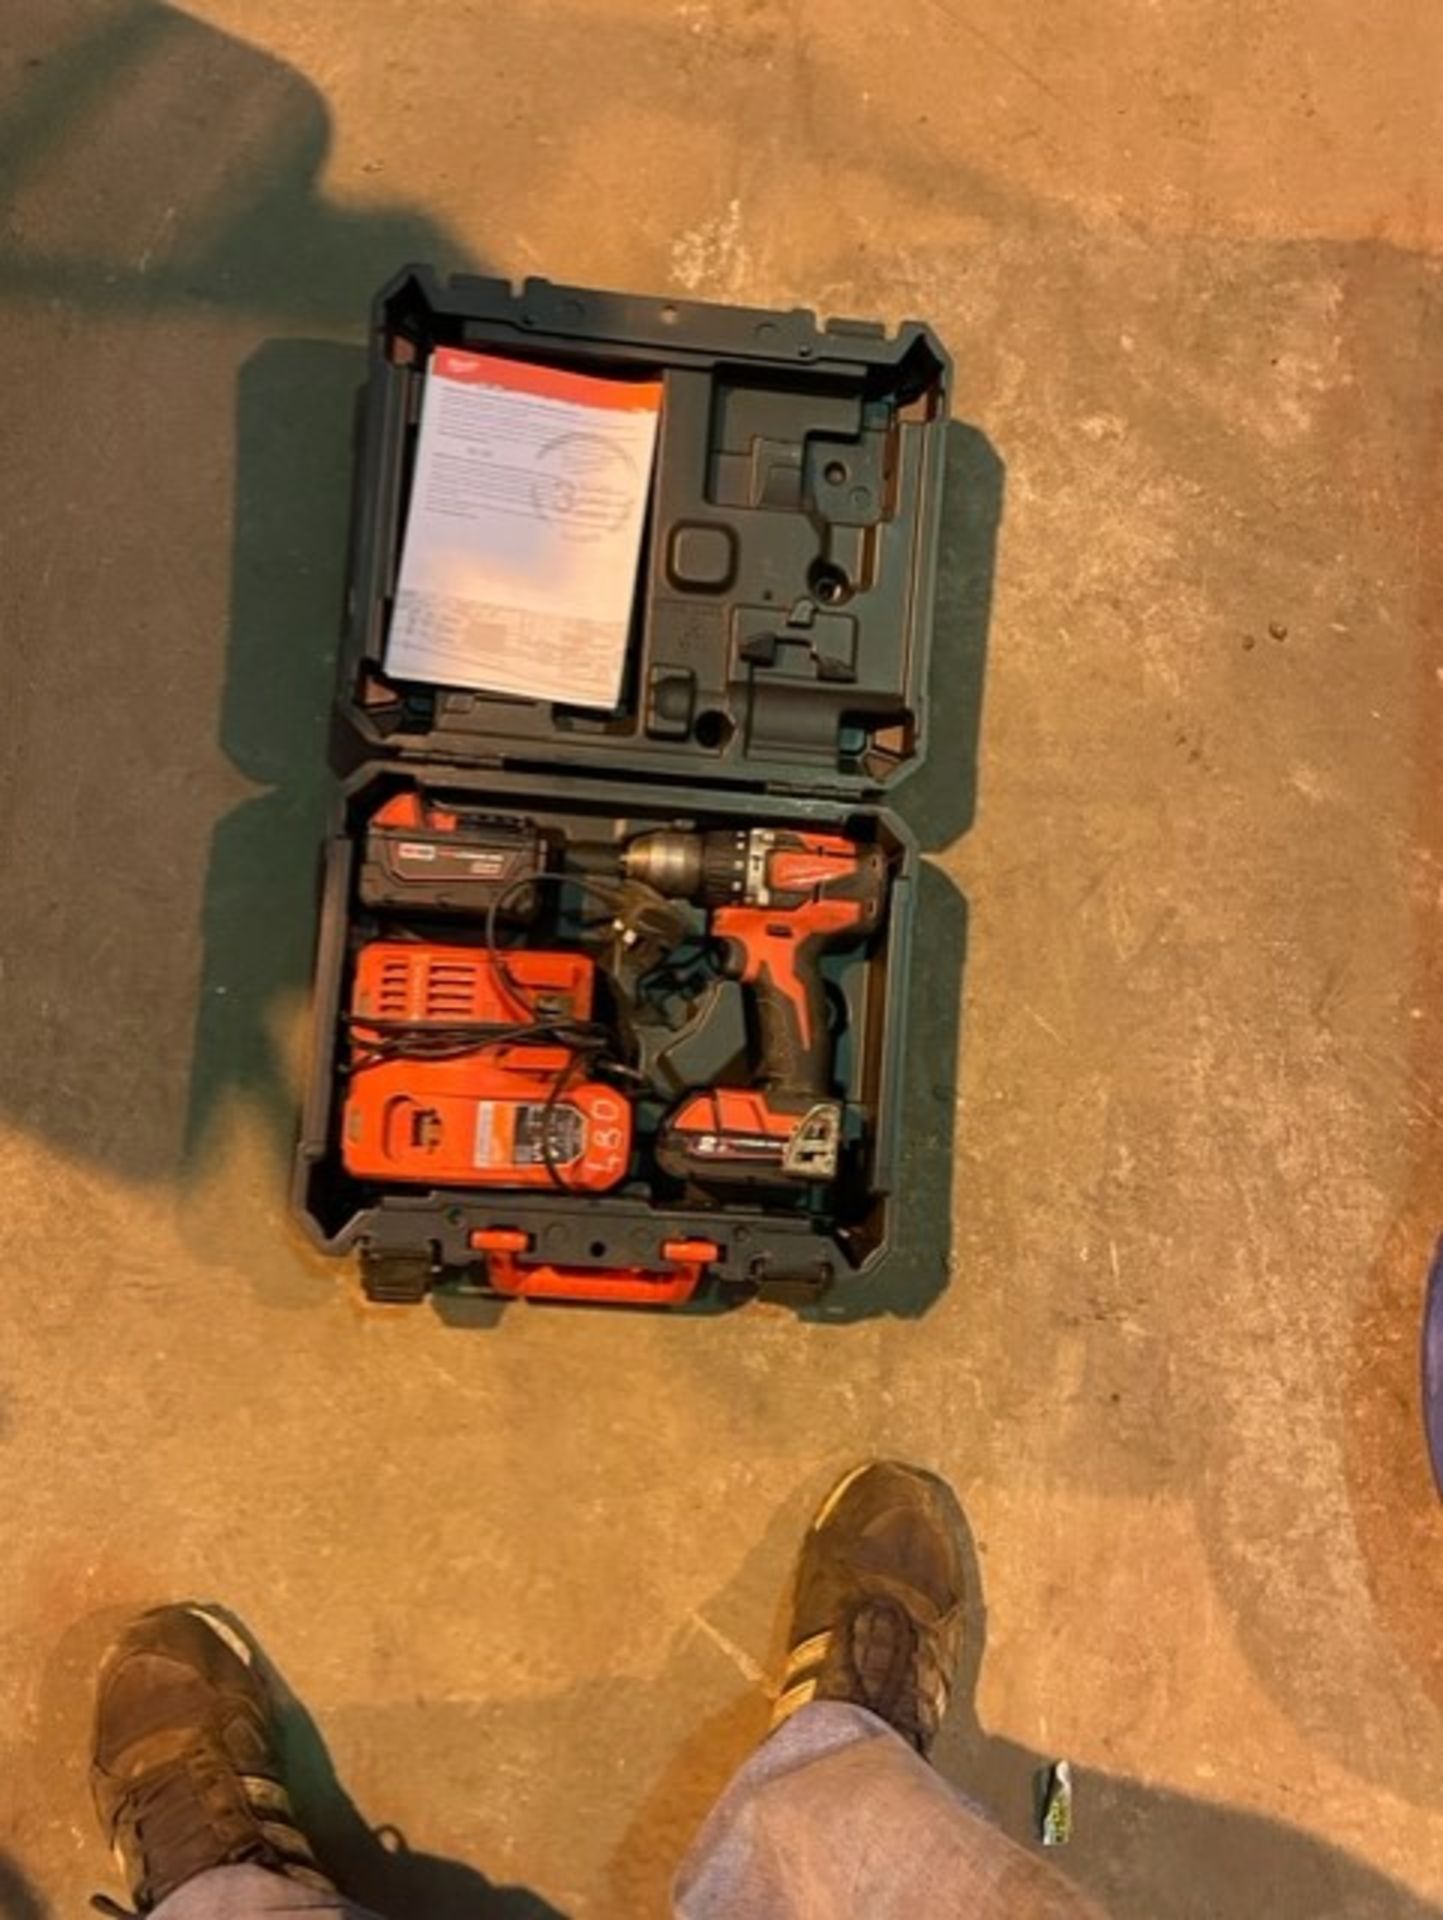 Returns Milwaukee drill and battery’s and chargers untested